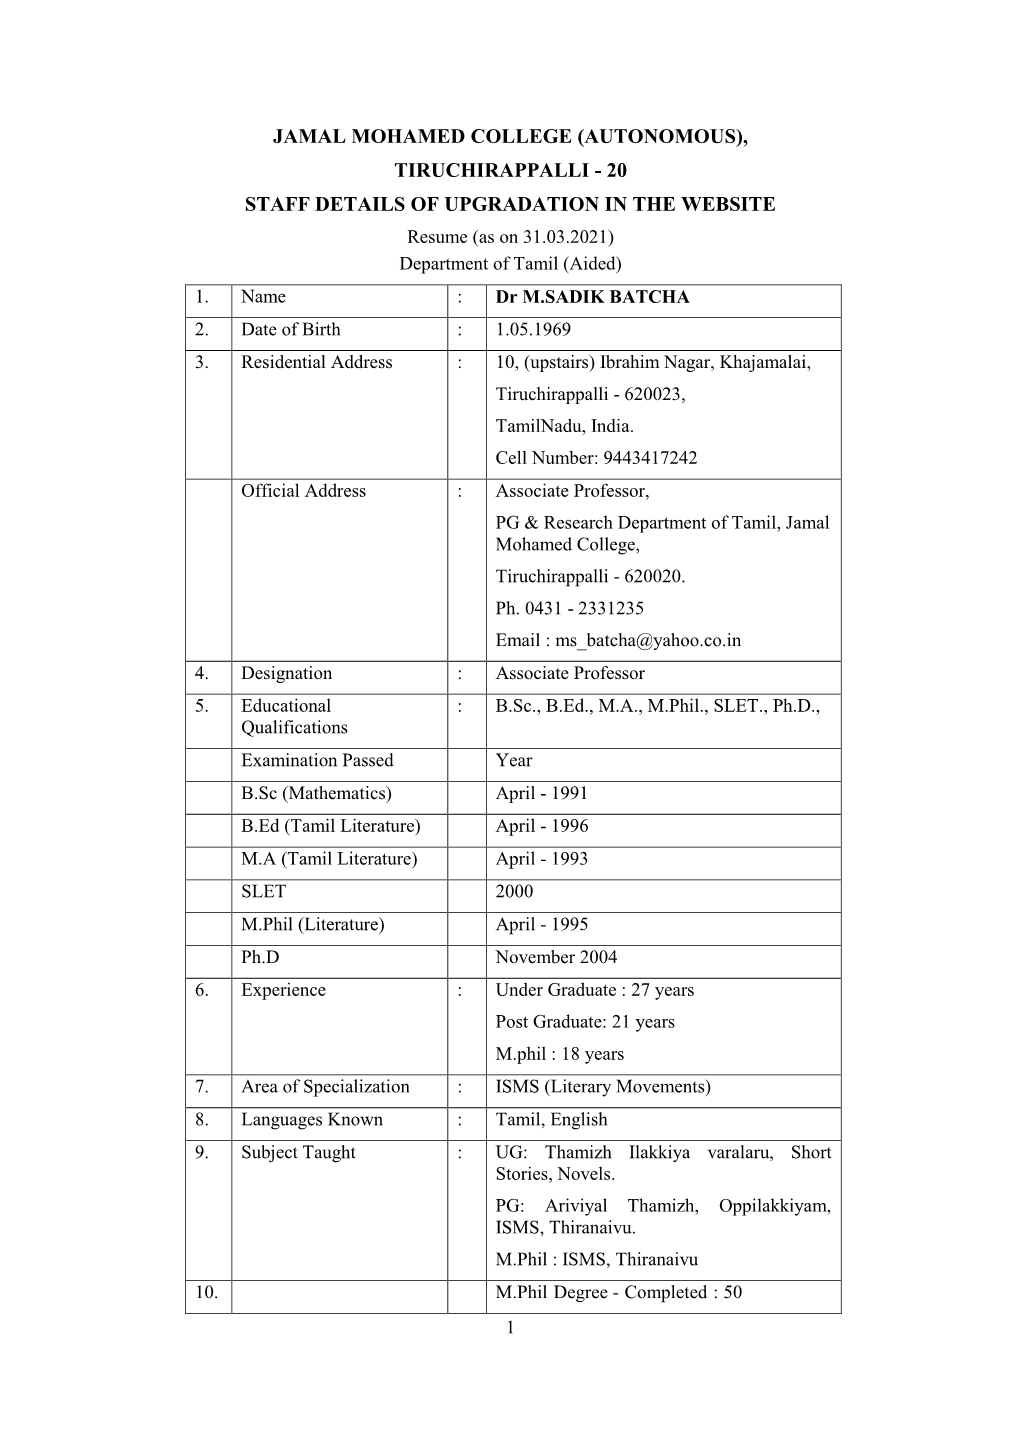 TIRUCHIRAPPALLI - 20 STAFF DETAILS of UPGRADATION in the WEBSITE Resume (As on 31.03.2021) Department of Tamil (Aided) 1